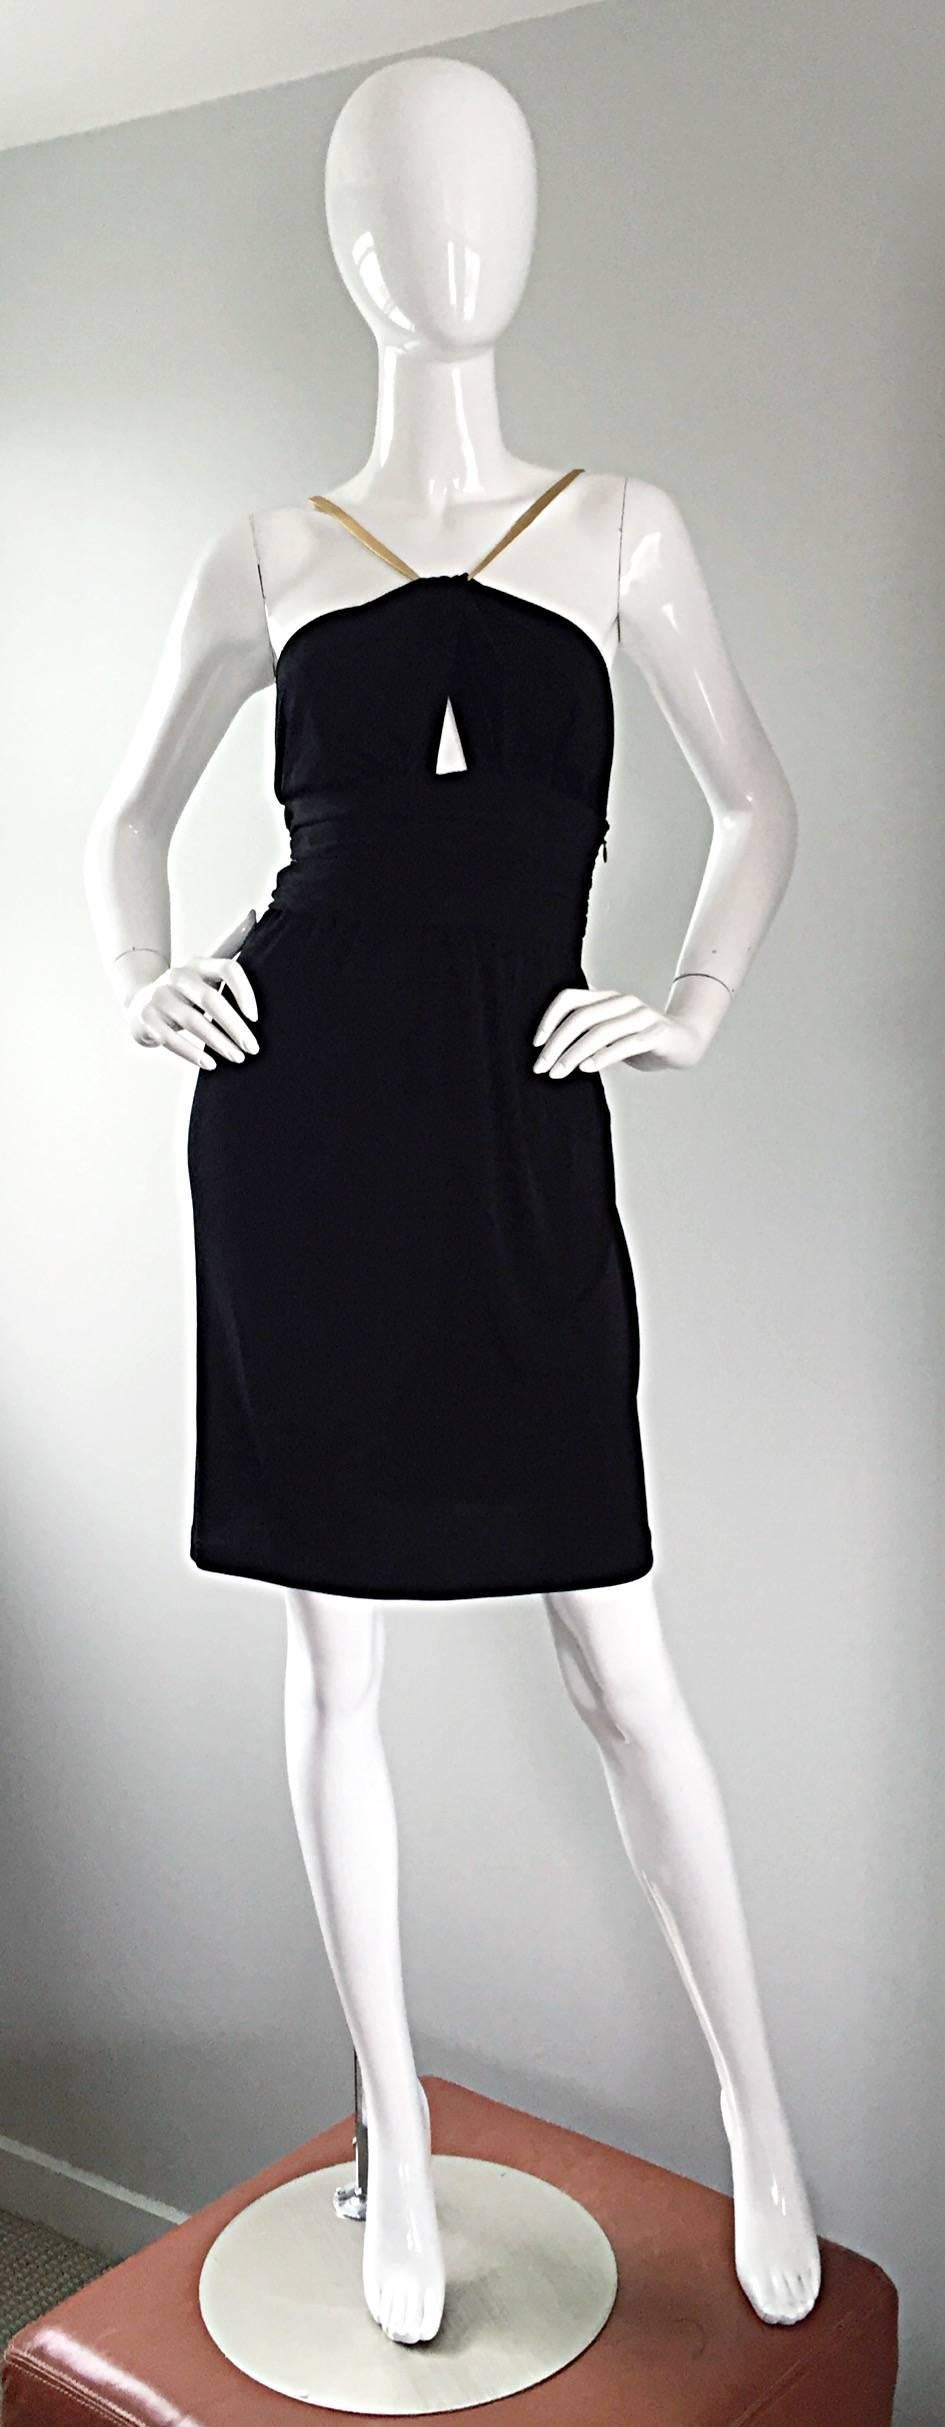 Sexy vintage CELINE dress! Black rayon jersey, that hugs the body in all the right places. Gold leather straps, and a peek-a-boo cut-out at bodice. Brilliantly strategic pleats at the waistband. Hidden zip up the side. The perfect little black